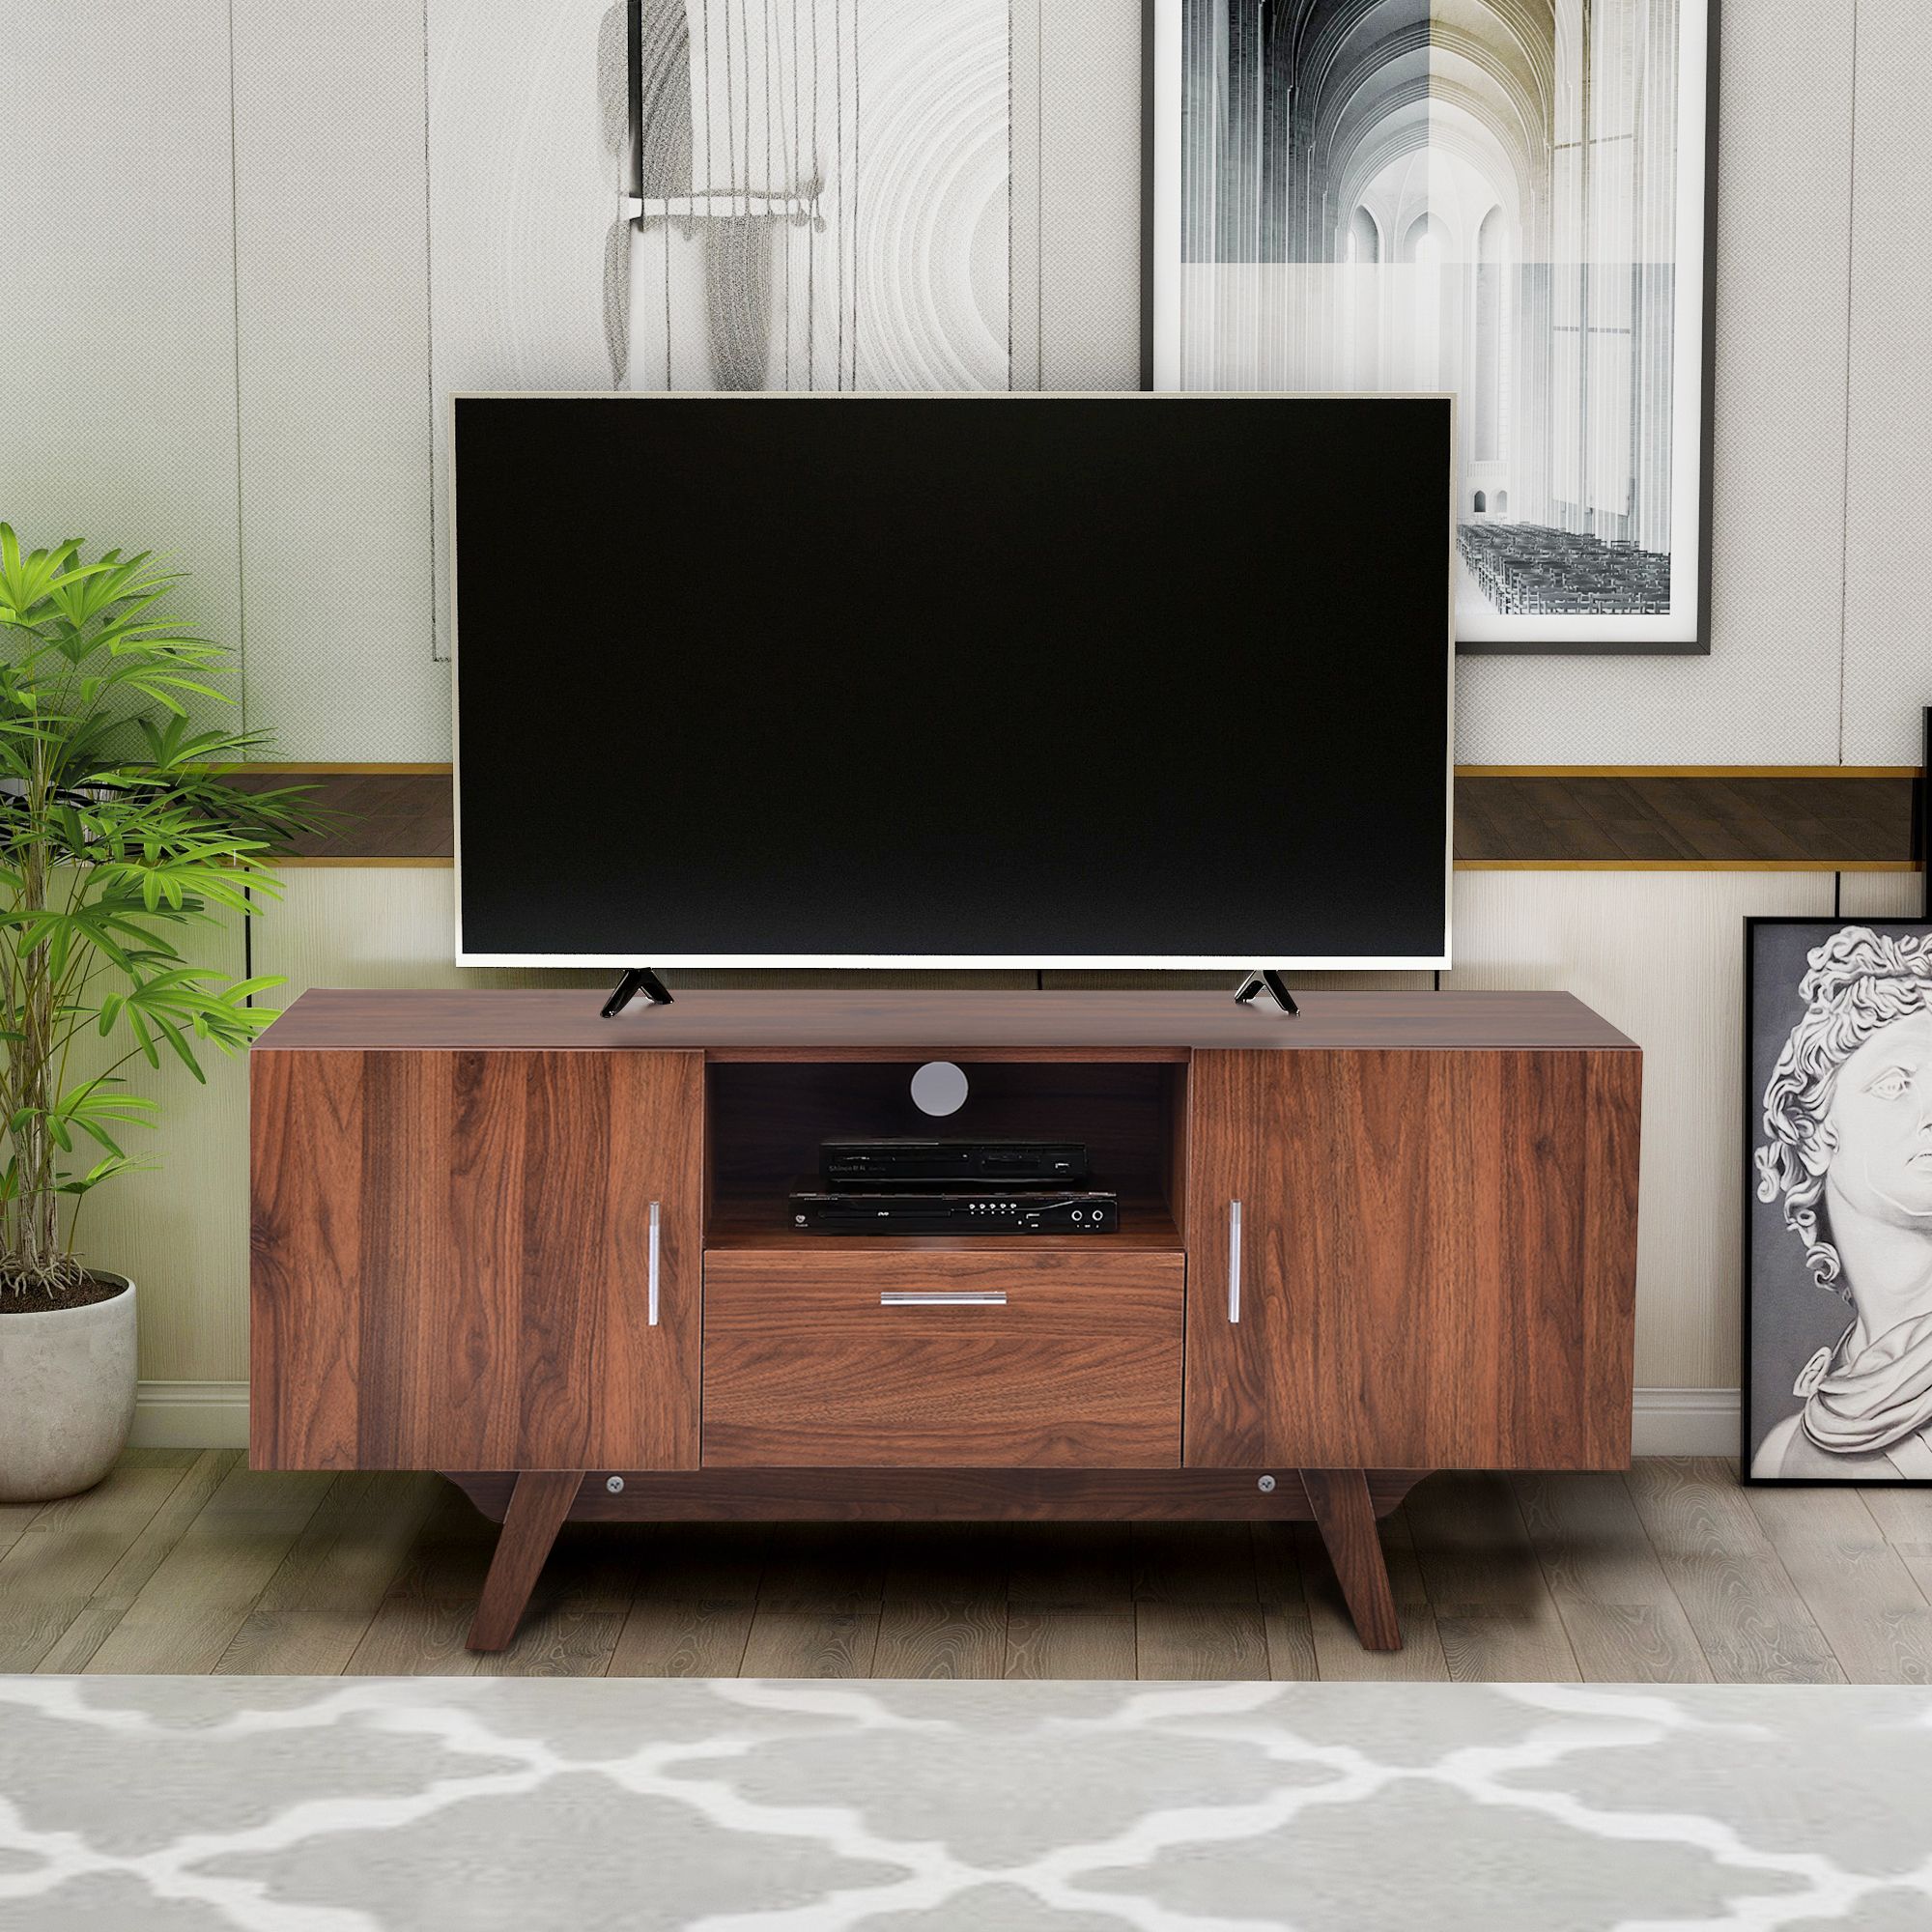 Hommoo Tv Stand With Metal Legs For Tv's Up To 55 Inches With Spellman Tv Stands For Tvs Up To 55" (View 8 of 15)